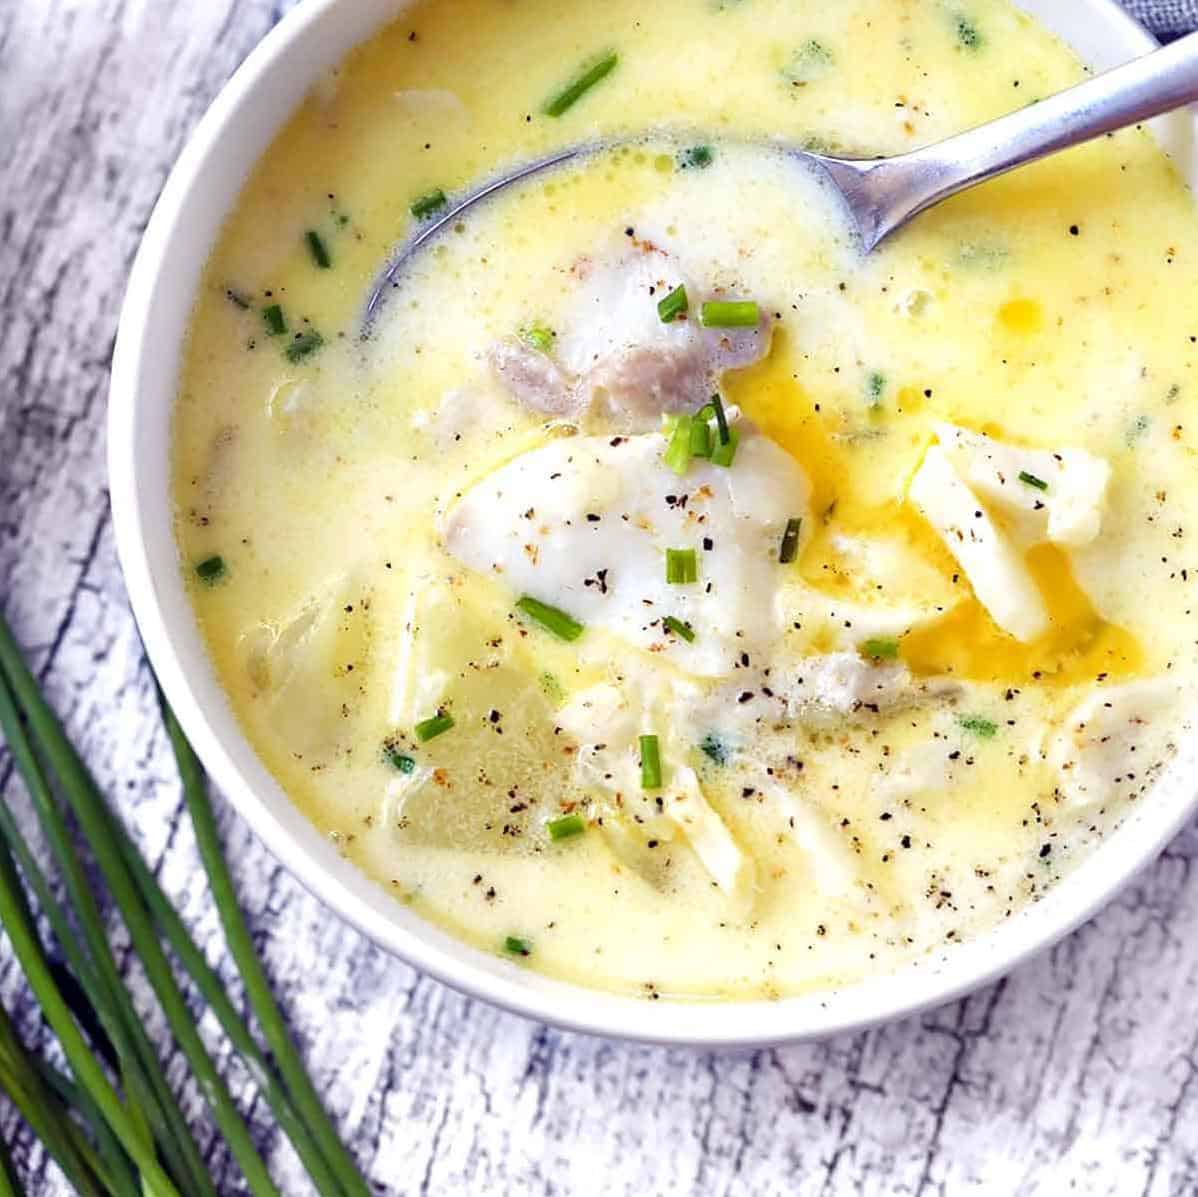  The ultimate comfort food on a chilly day, our walleye chowder is hearty and satisfying.